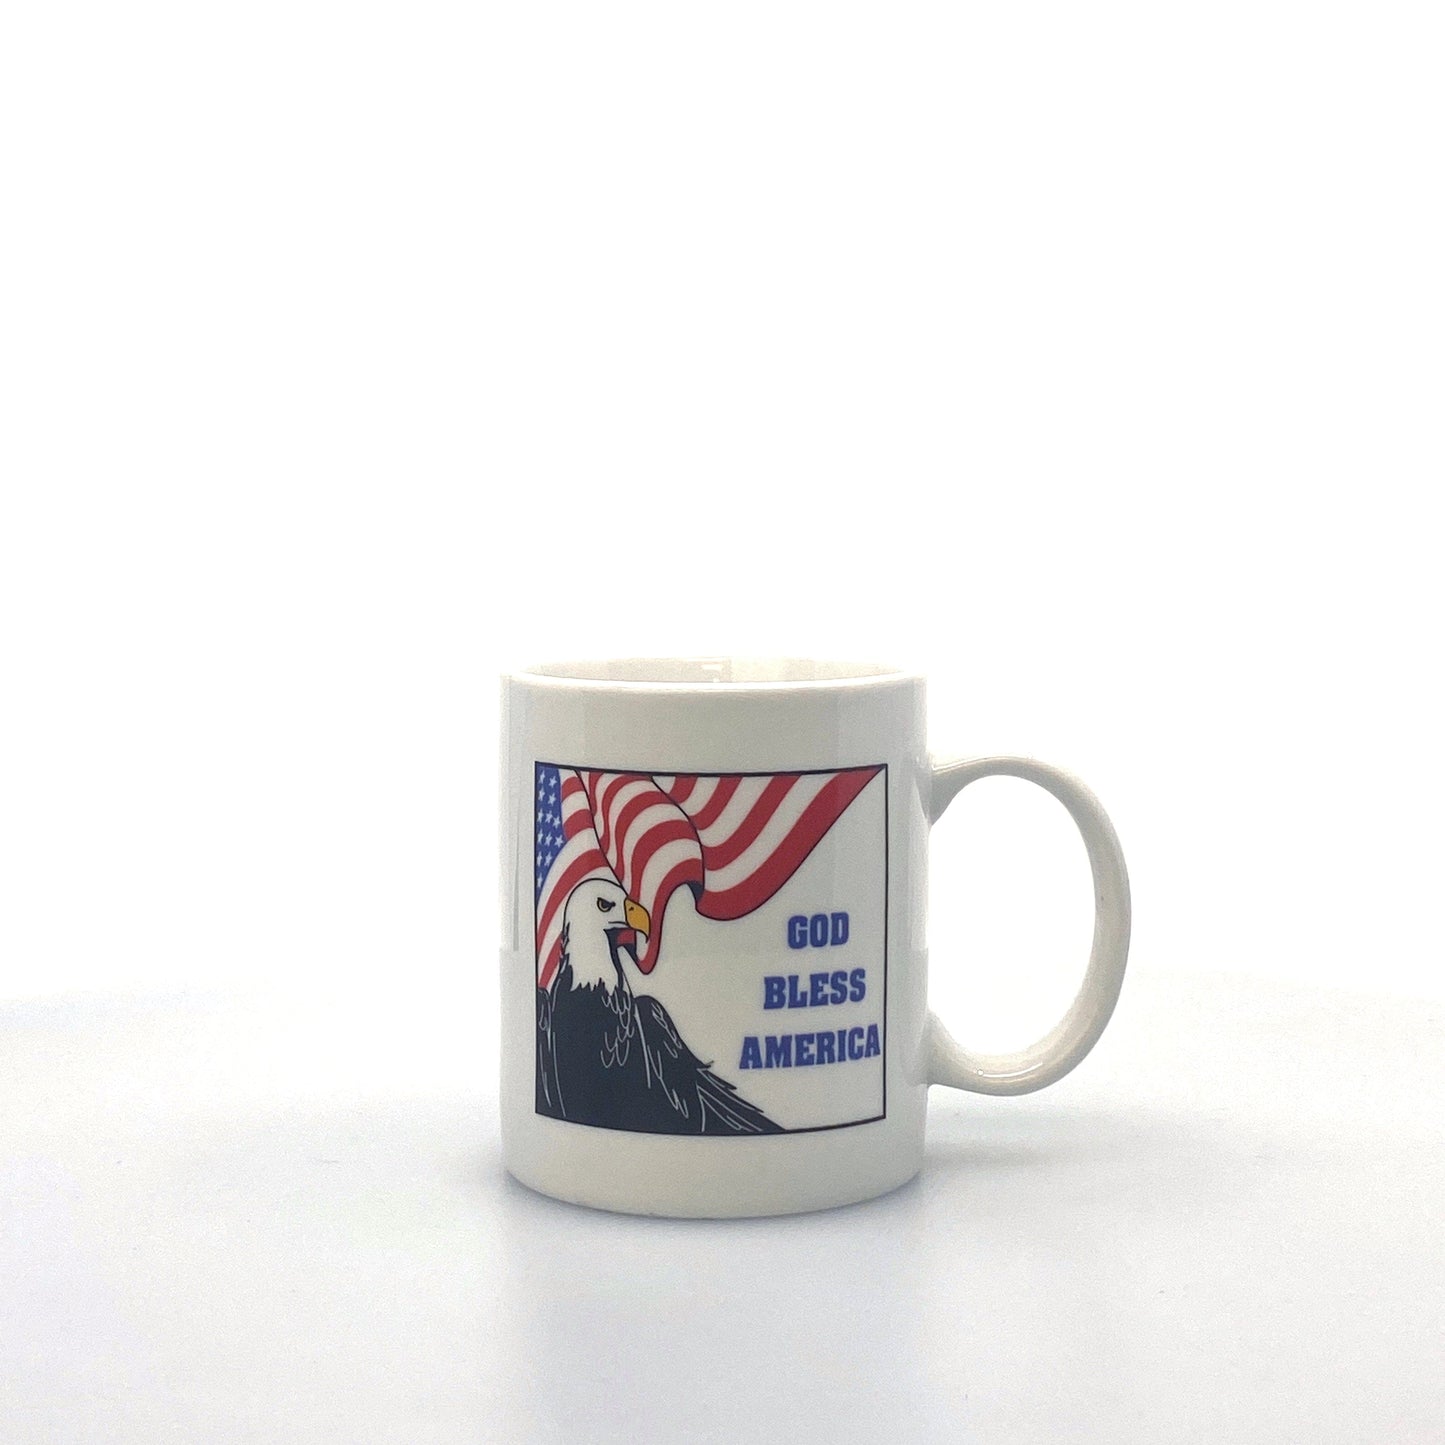 God Bless America / USA Coffee Cup Set of 2 - Military Service CO.